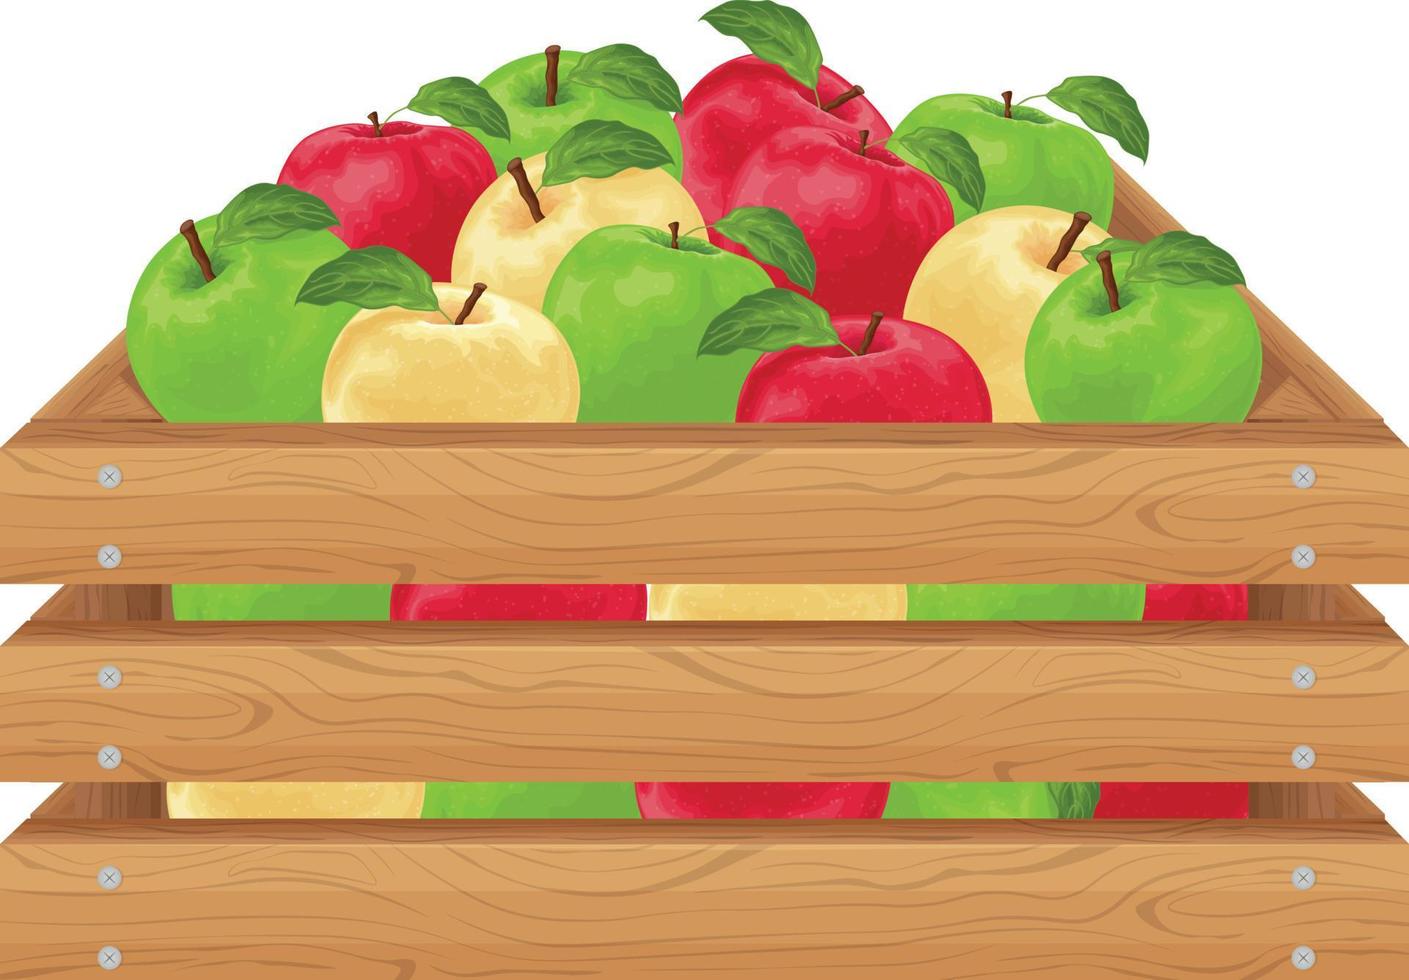 Apples. Ripe apples in a wooden box. A box with colorful apples. Ripe fruit. Organic vegetarian products. Farm products. Vector illustration isolated on a white background